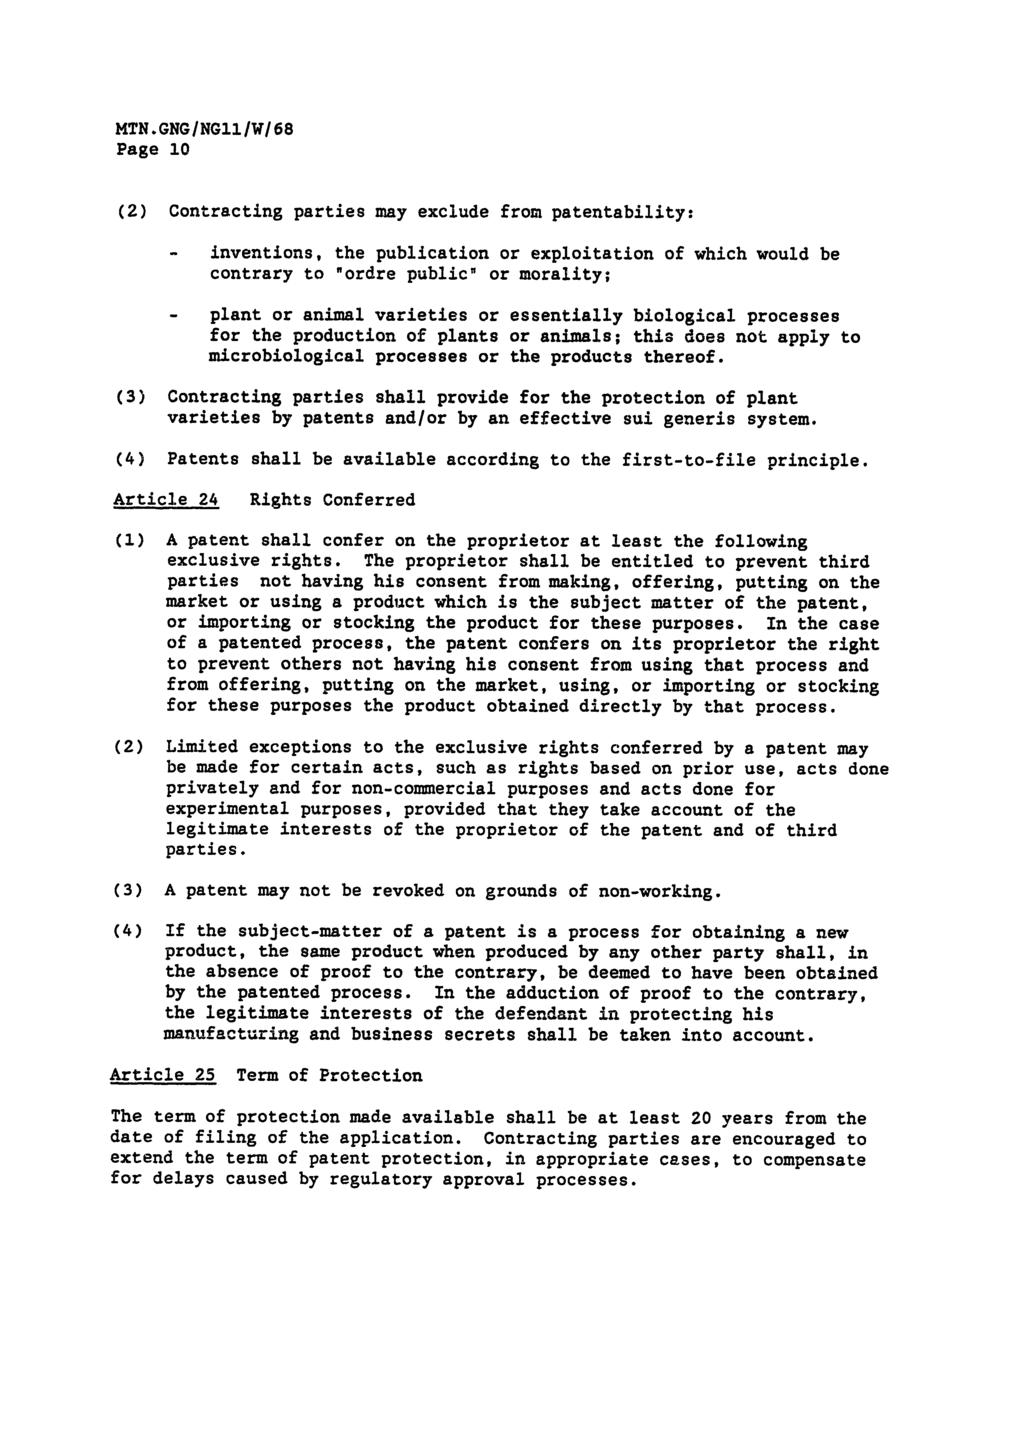 MTN.GNG/NG11/W/68 Page 10 (2) Contracting parties may exclude from patentability: - inventions, the publication or exploitation of which would be contrary to "ordre public" or morality; - plant or